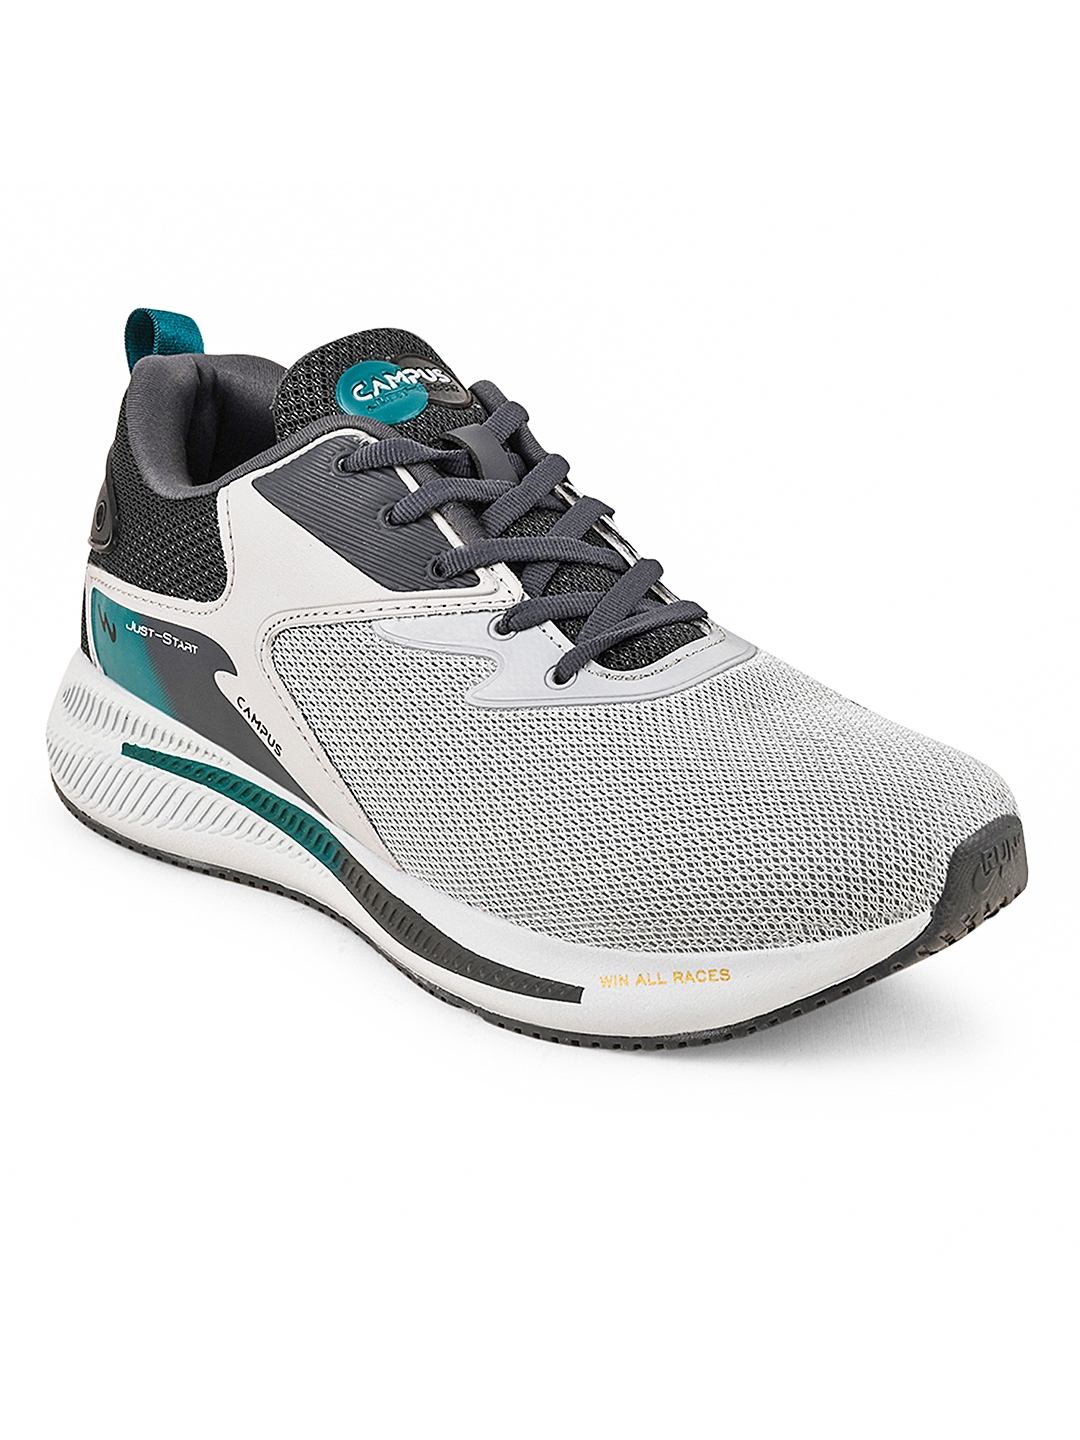 Men's CAMP-TRUTH Grey Mesh Running Shoes